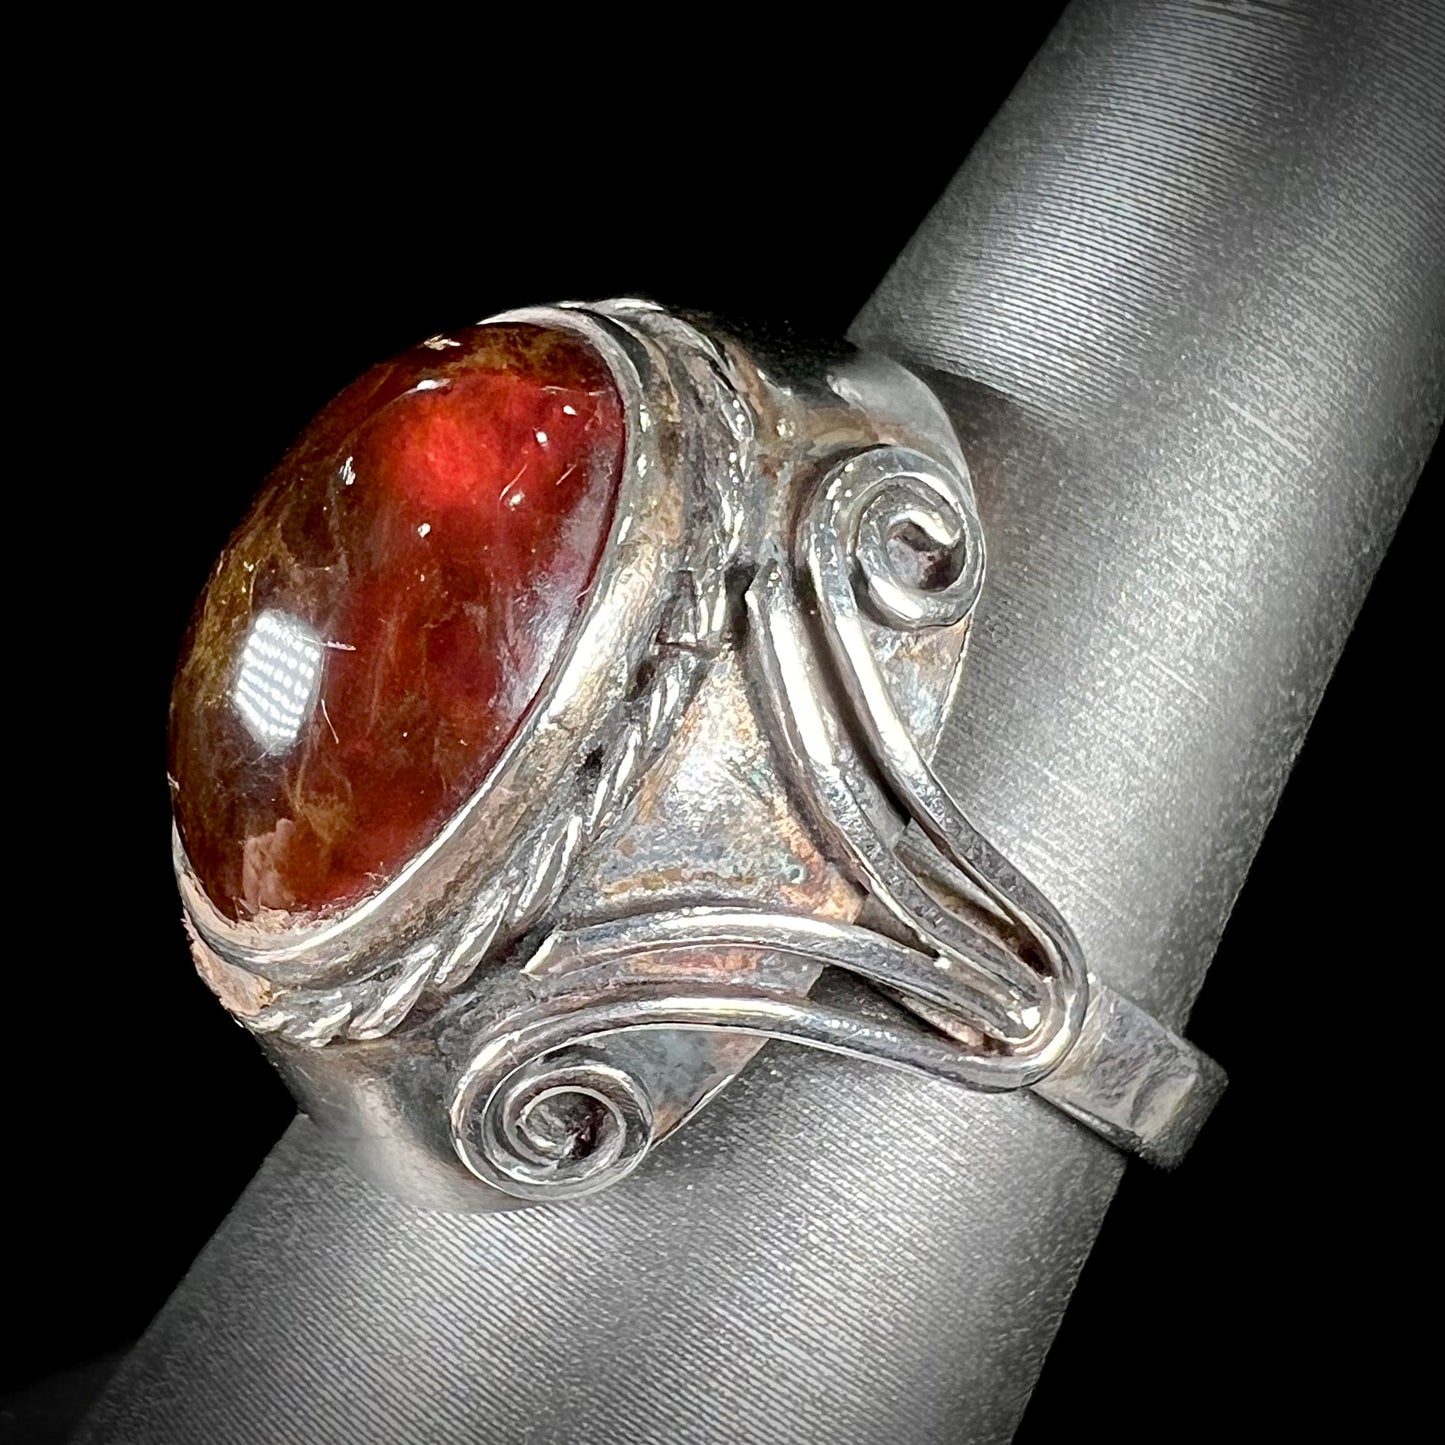 A sterling silver filigree style ring set with an oval cabochon cut red-orange amber stone.